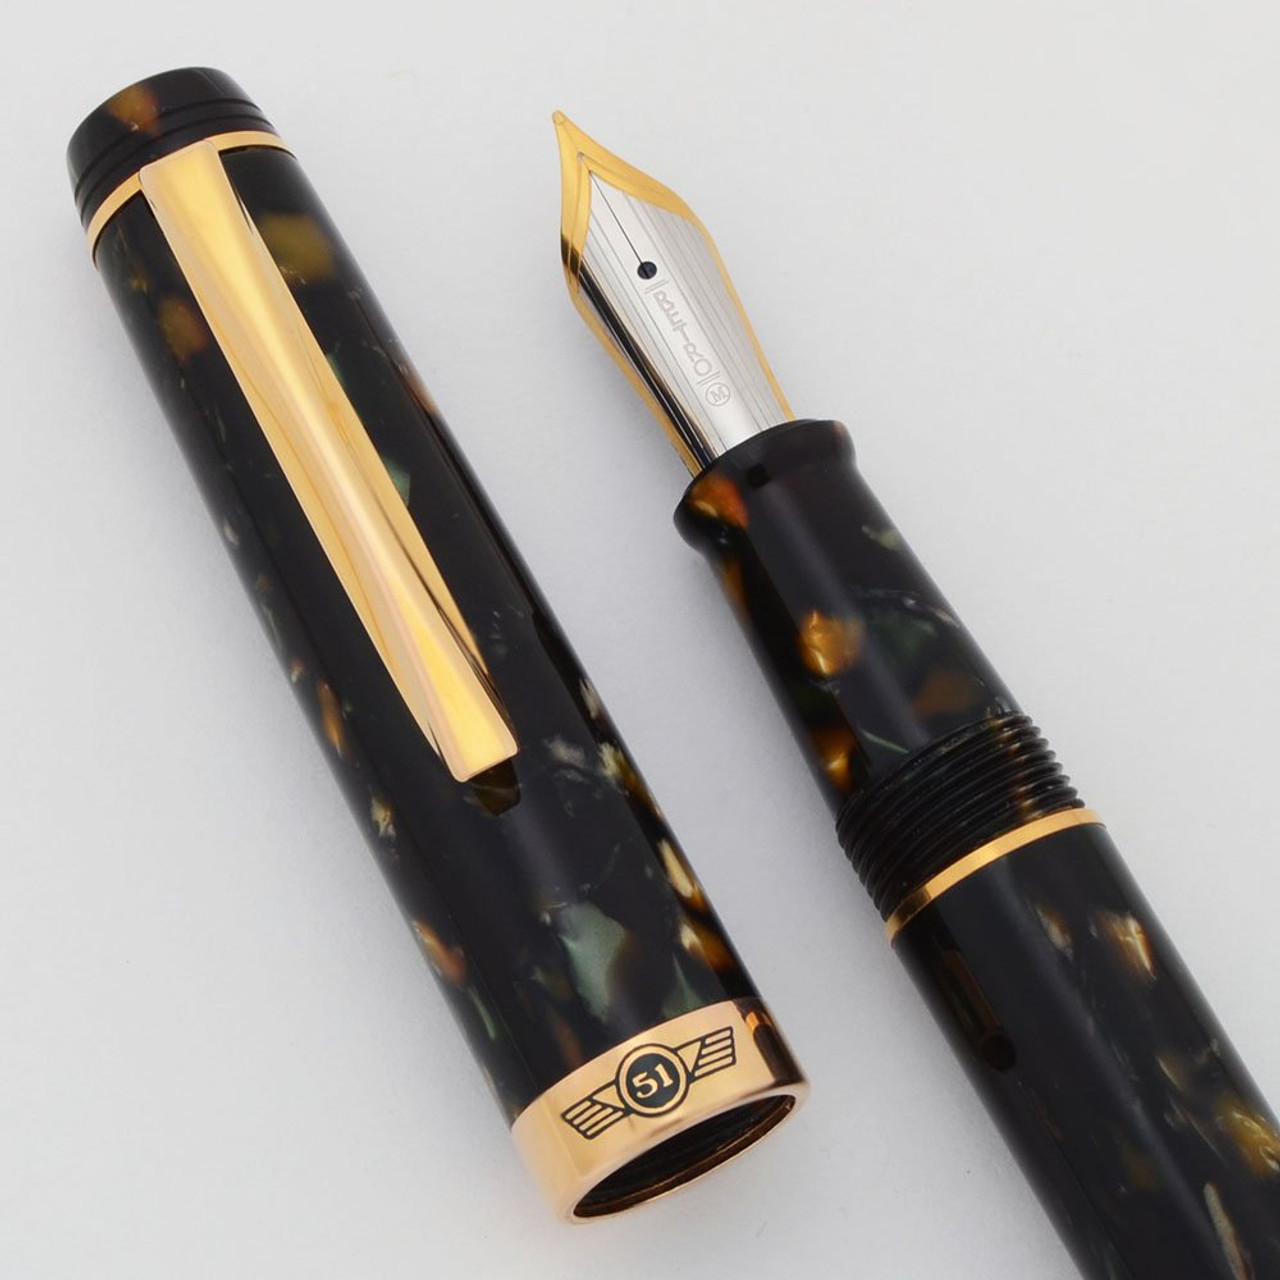 Retro 51 Fountain Pen (2000s) - Brown Green Marble, C/C, Medium Two-Tone Nib (Excellent +, Works Well)